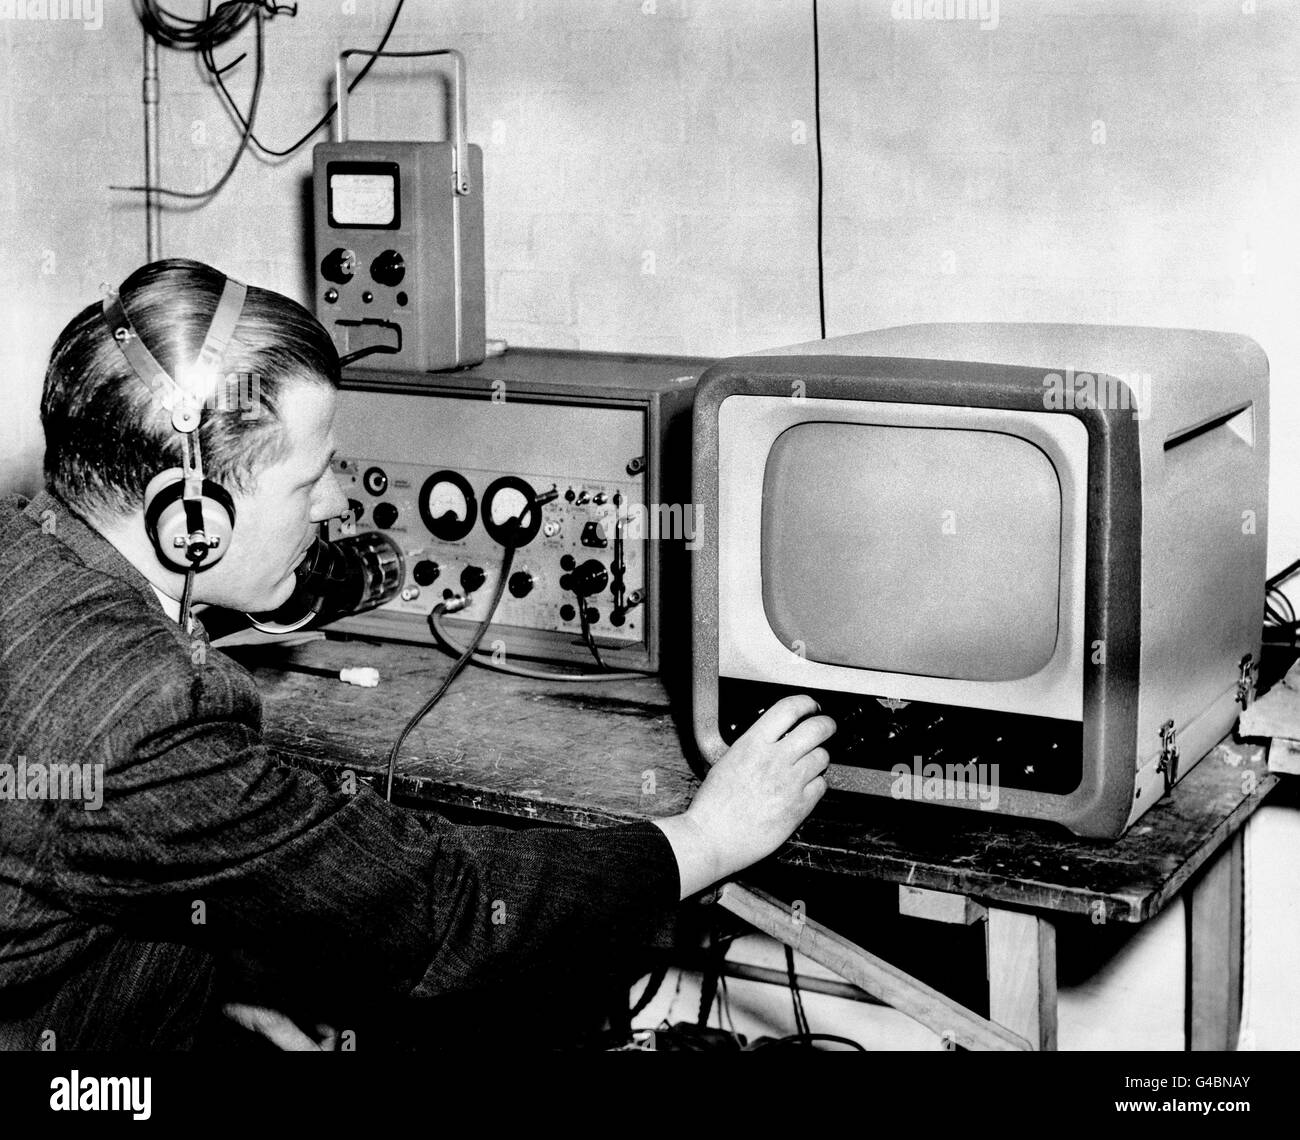 The transmitter control station at Senate House, London, showing the portable transmitter control unit. The Coronation of Queen Elizabeth II is making history for television with the transmission of live pictures from London to the Continent of Europe of the ceremony and the London processions. Stock Photo